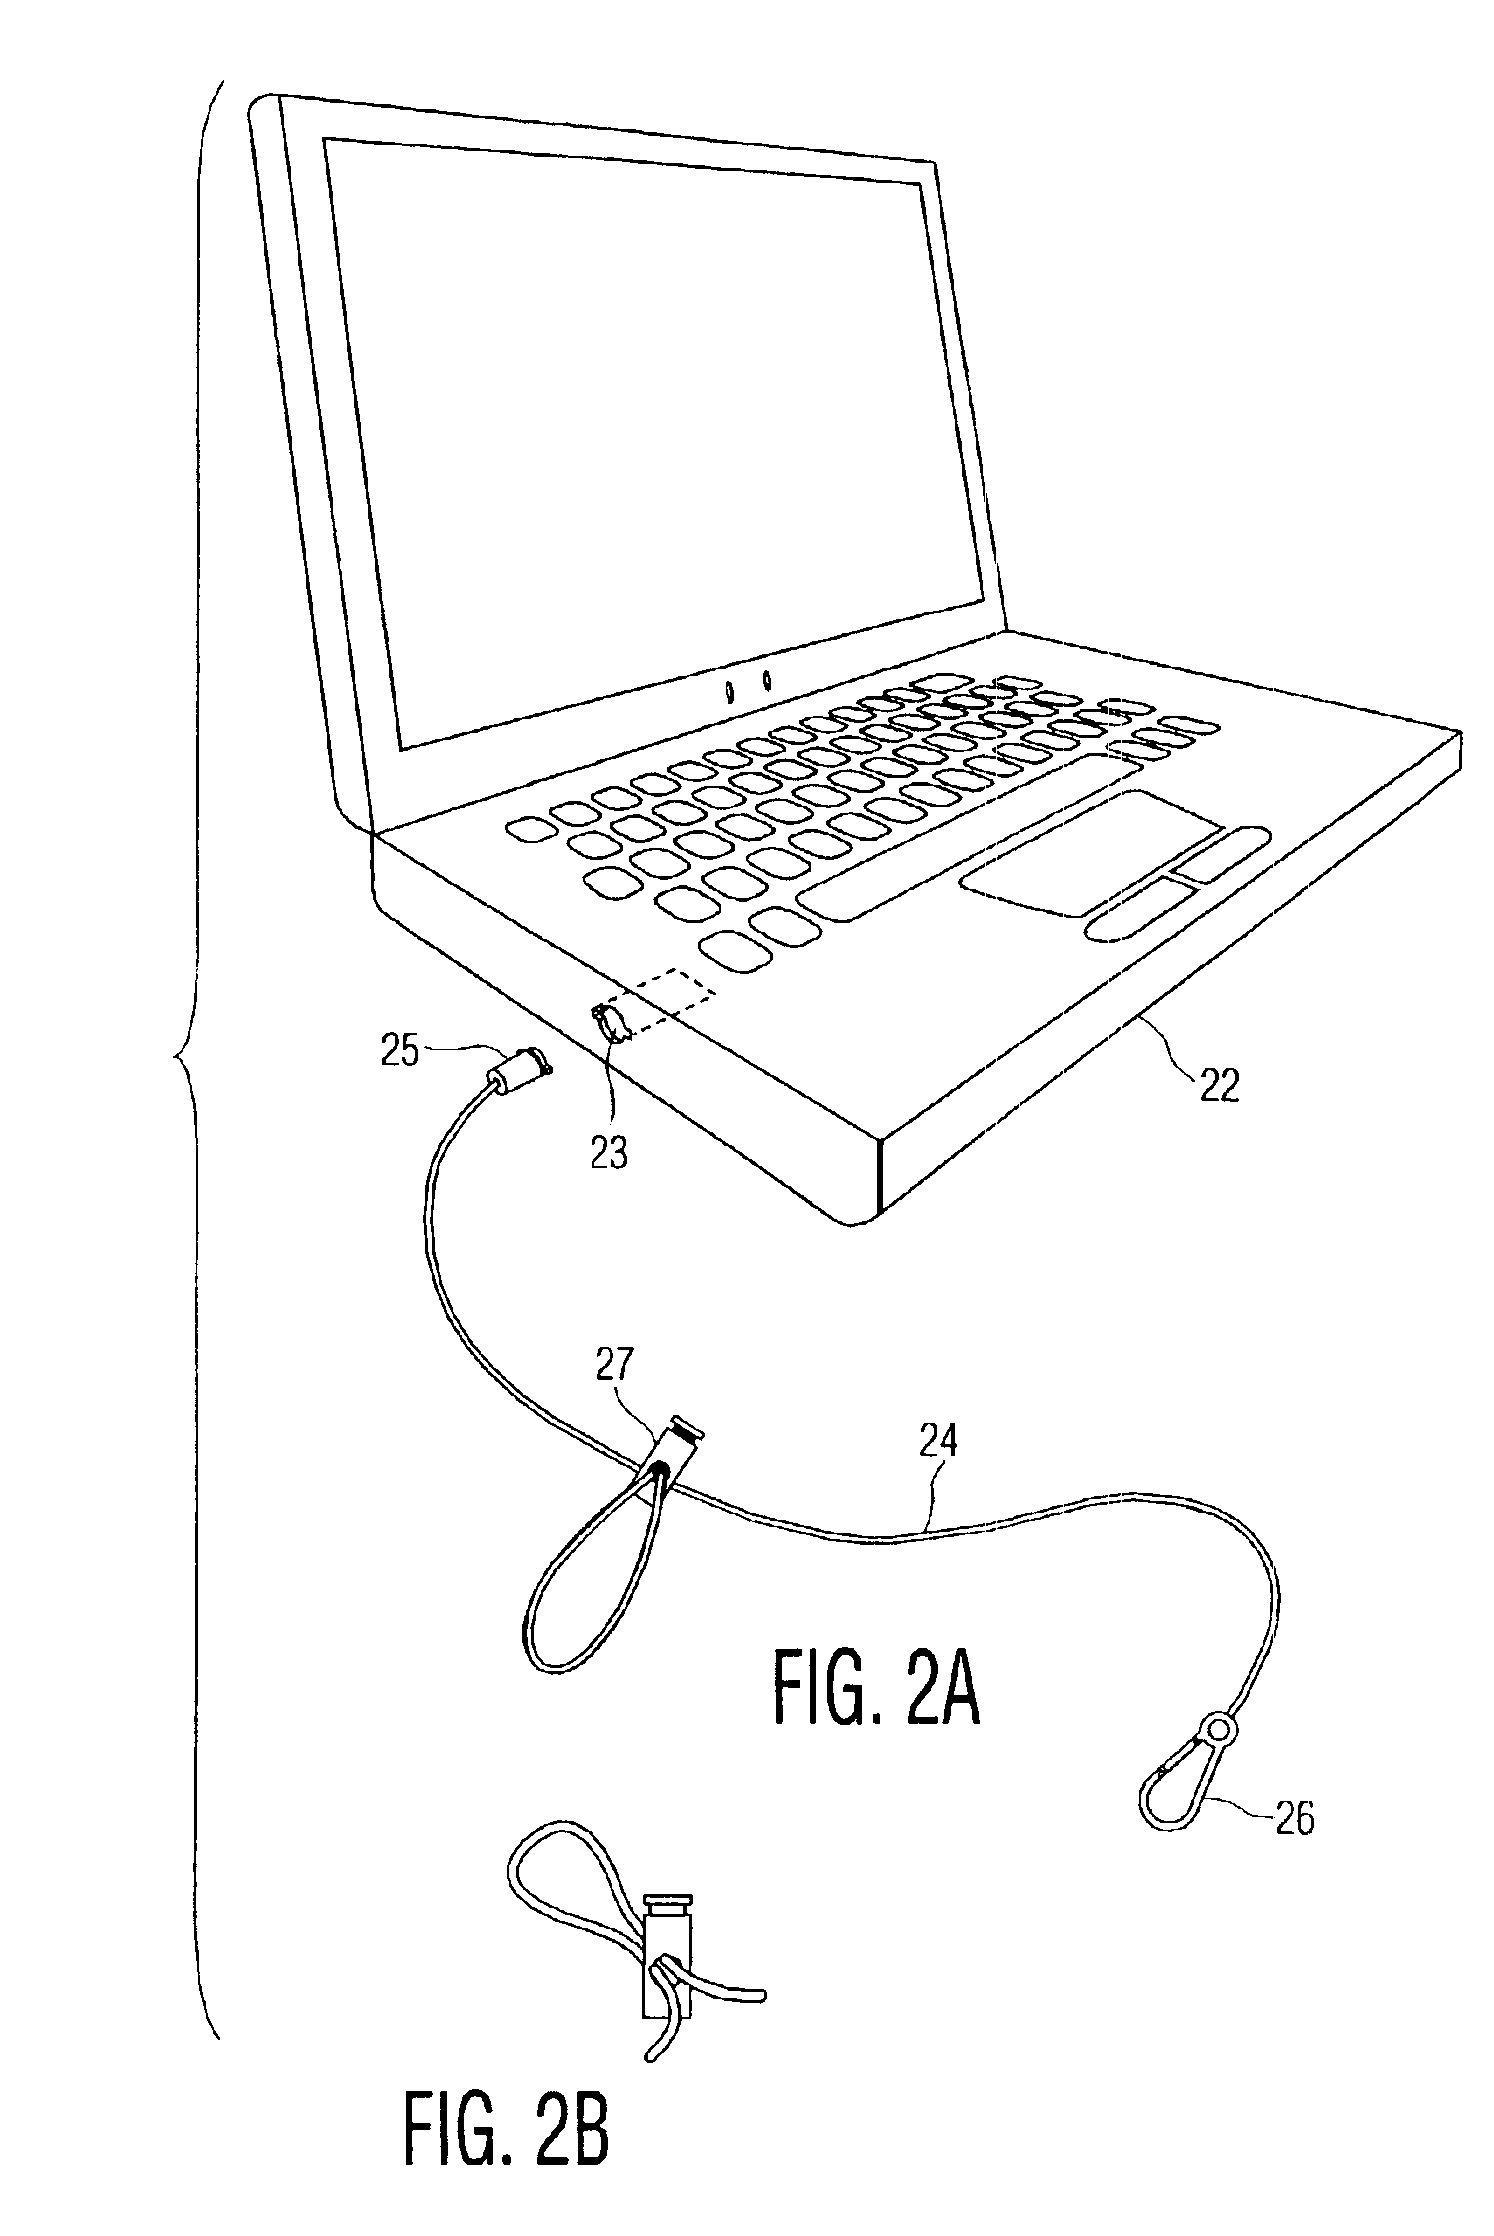 Tether arrangement for portable electronic device, such as a lap-top computer